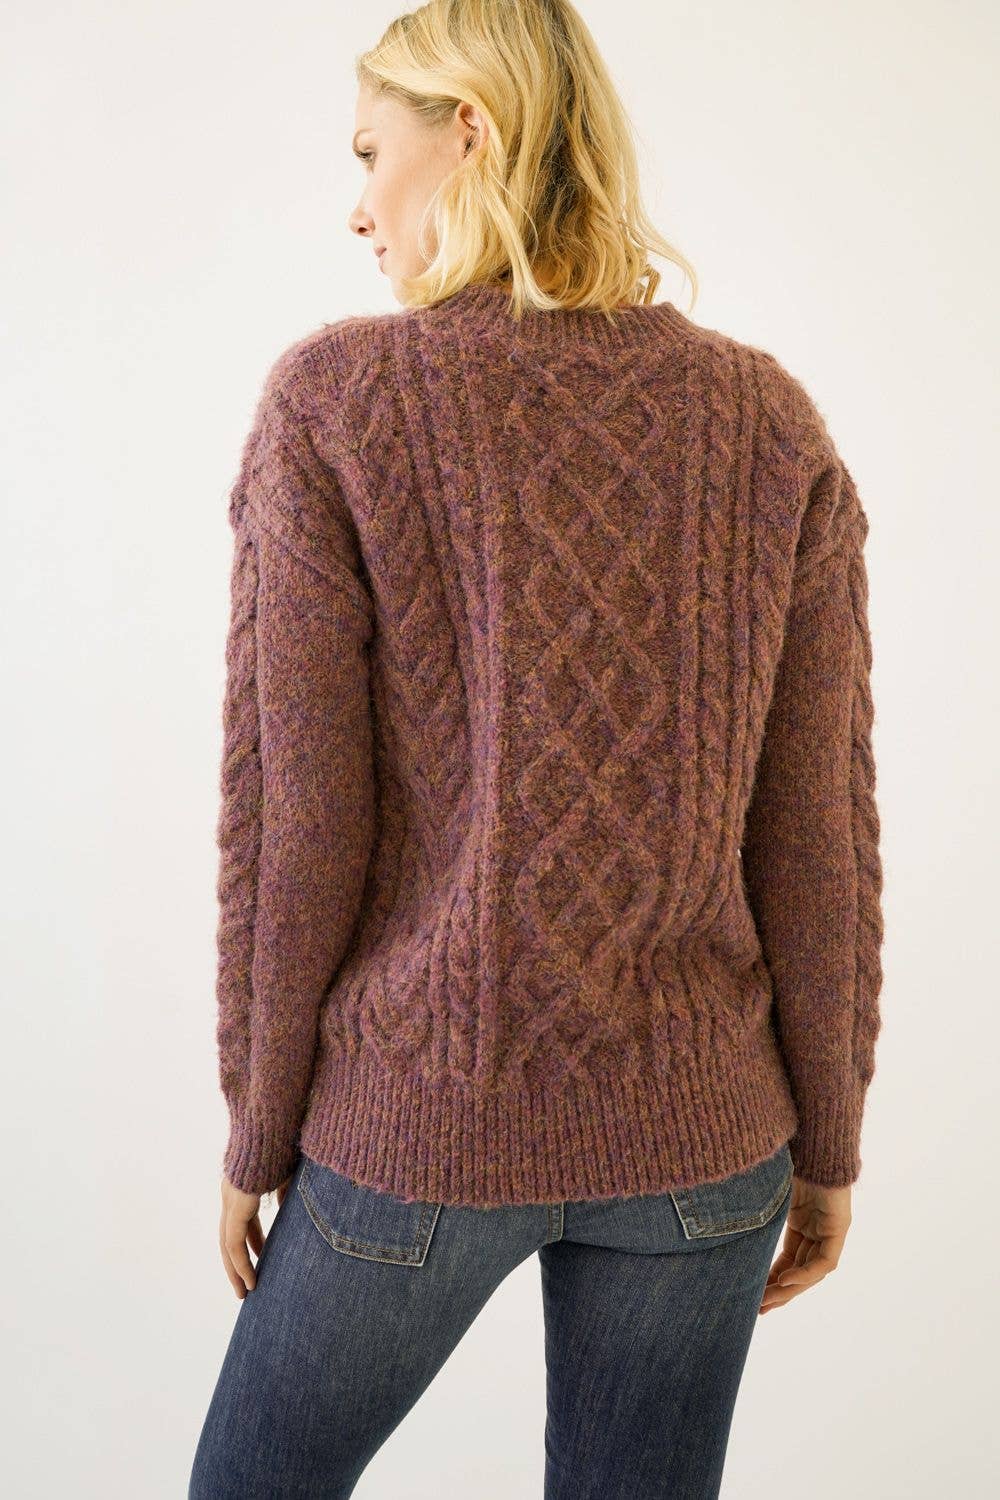 Berry Cable Knit Sweater